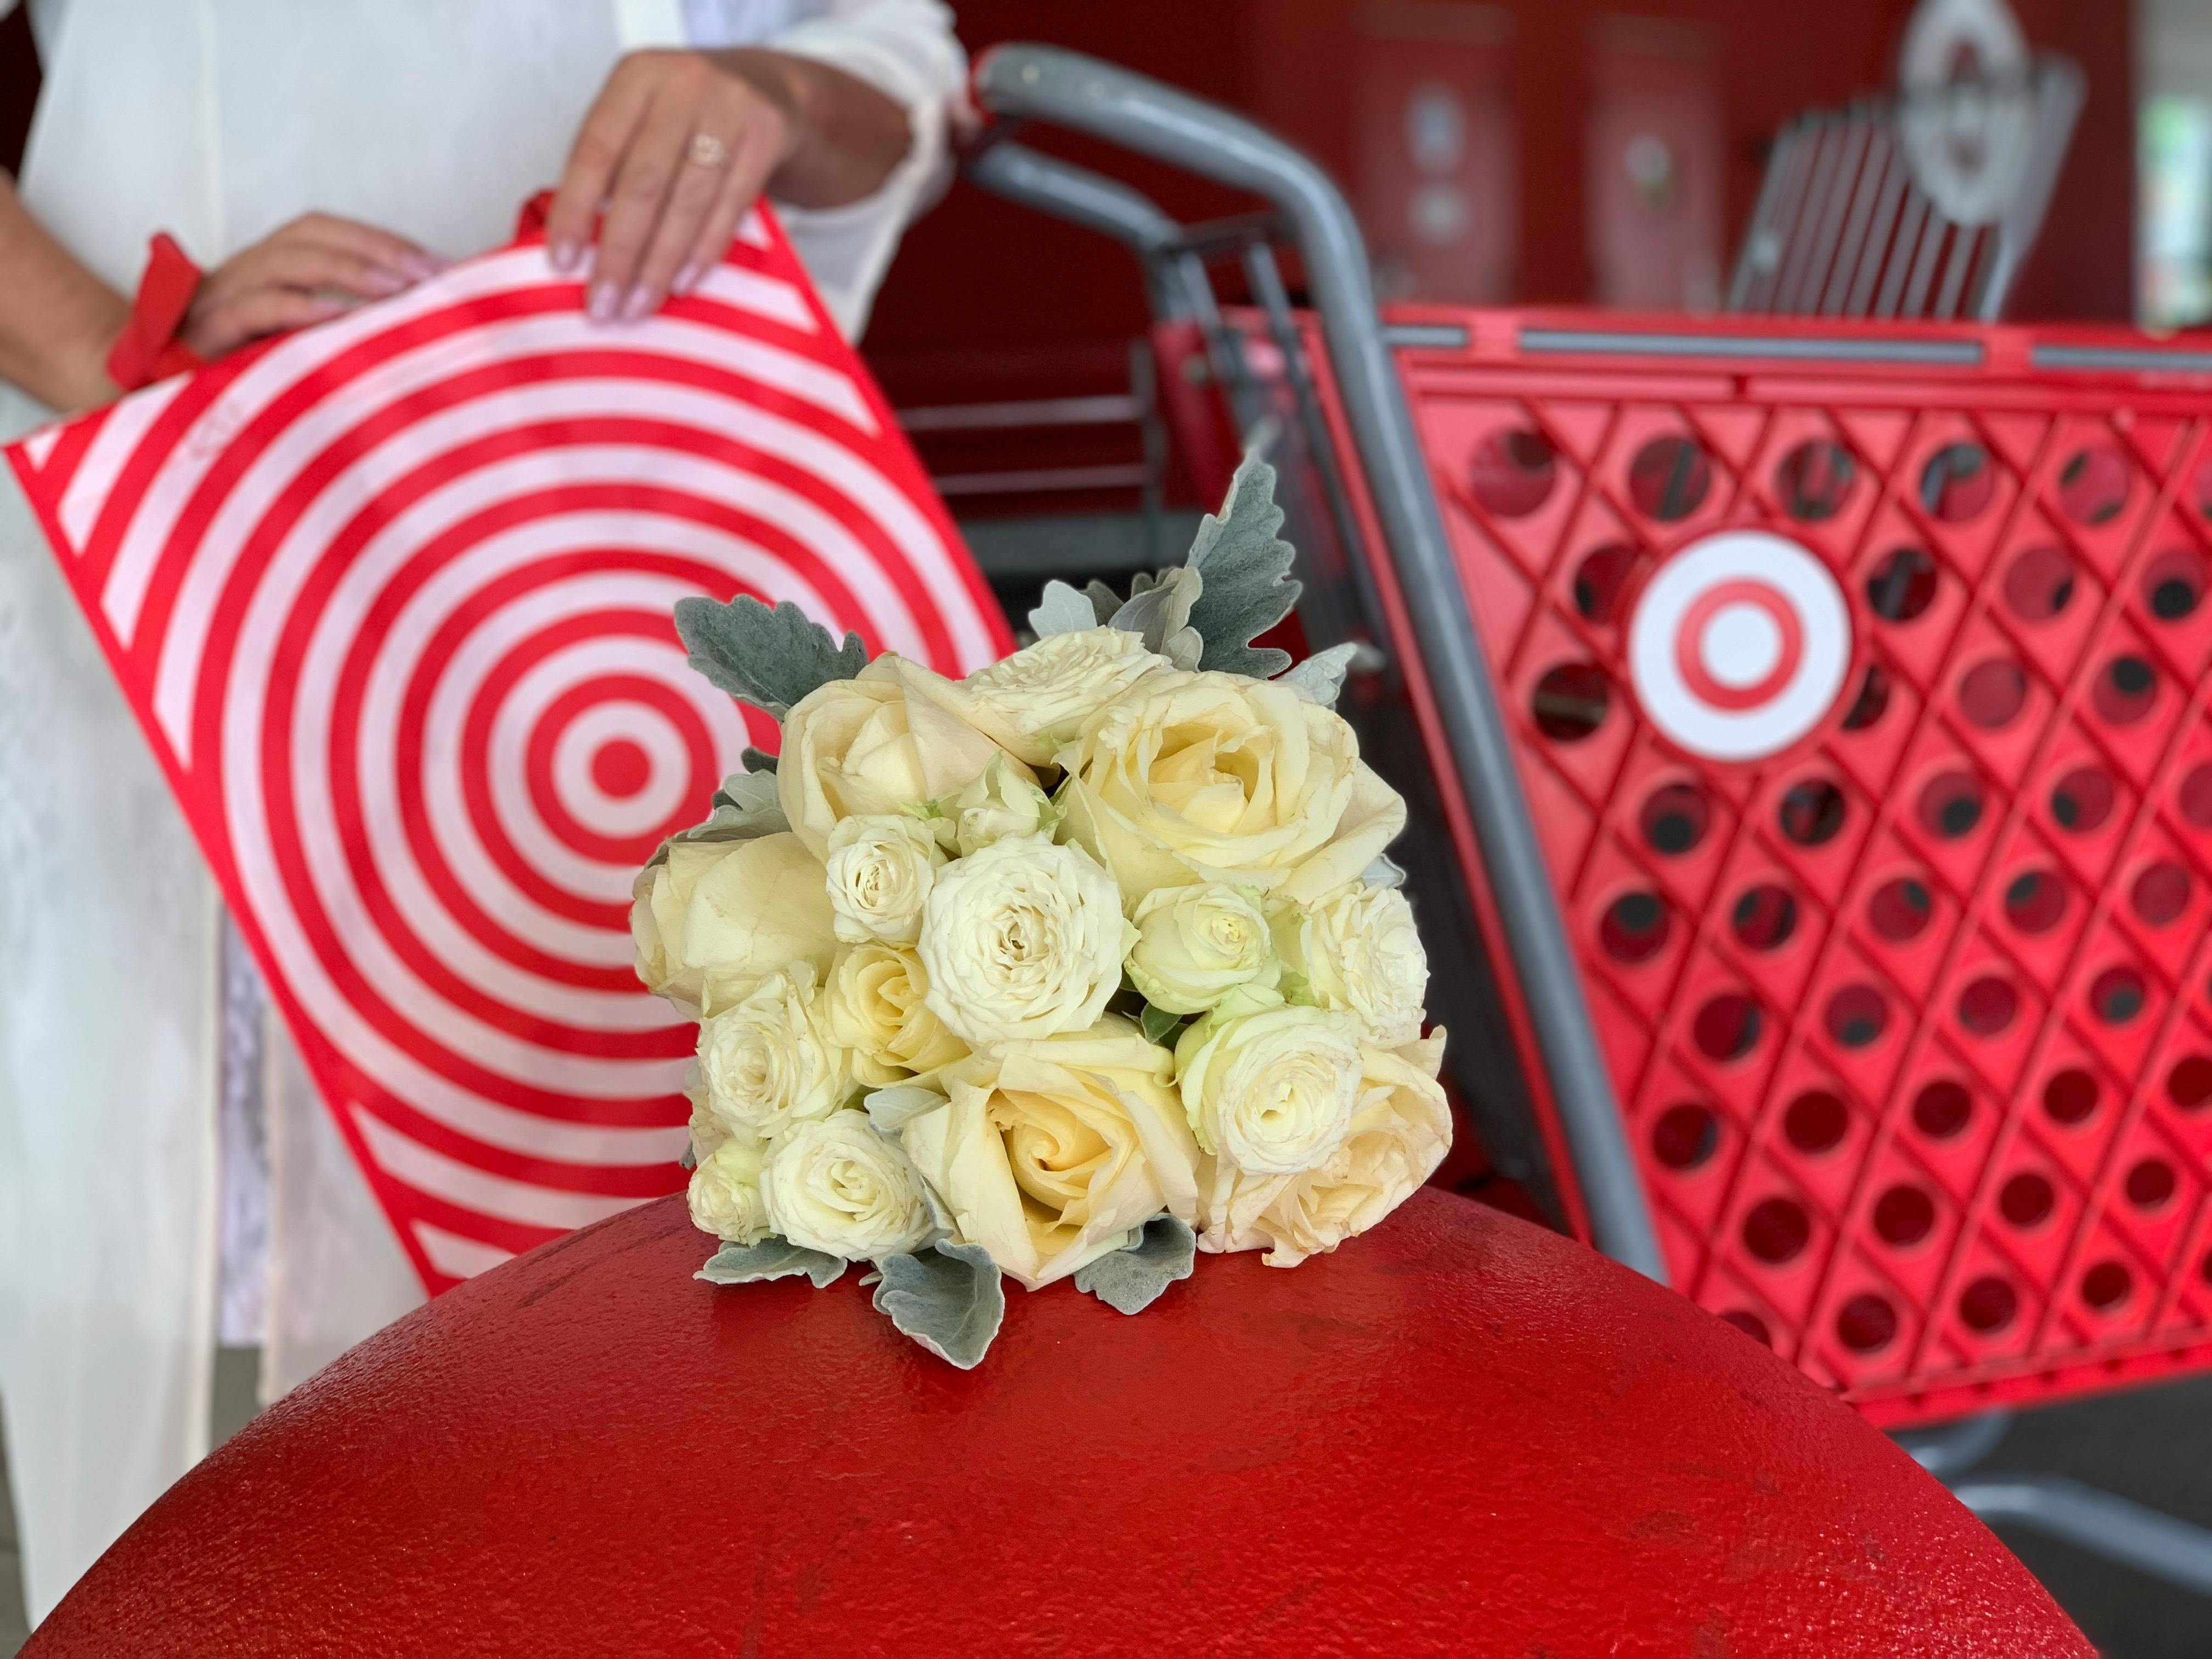 white bridal bouquet on big red ball near close up of target bag and shopping cart